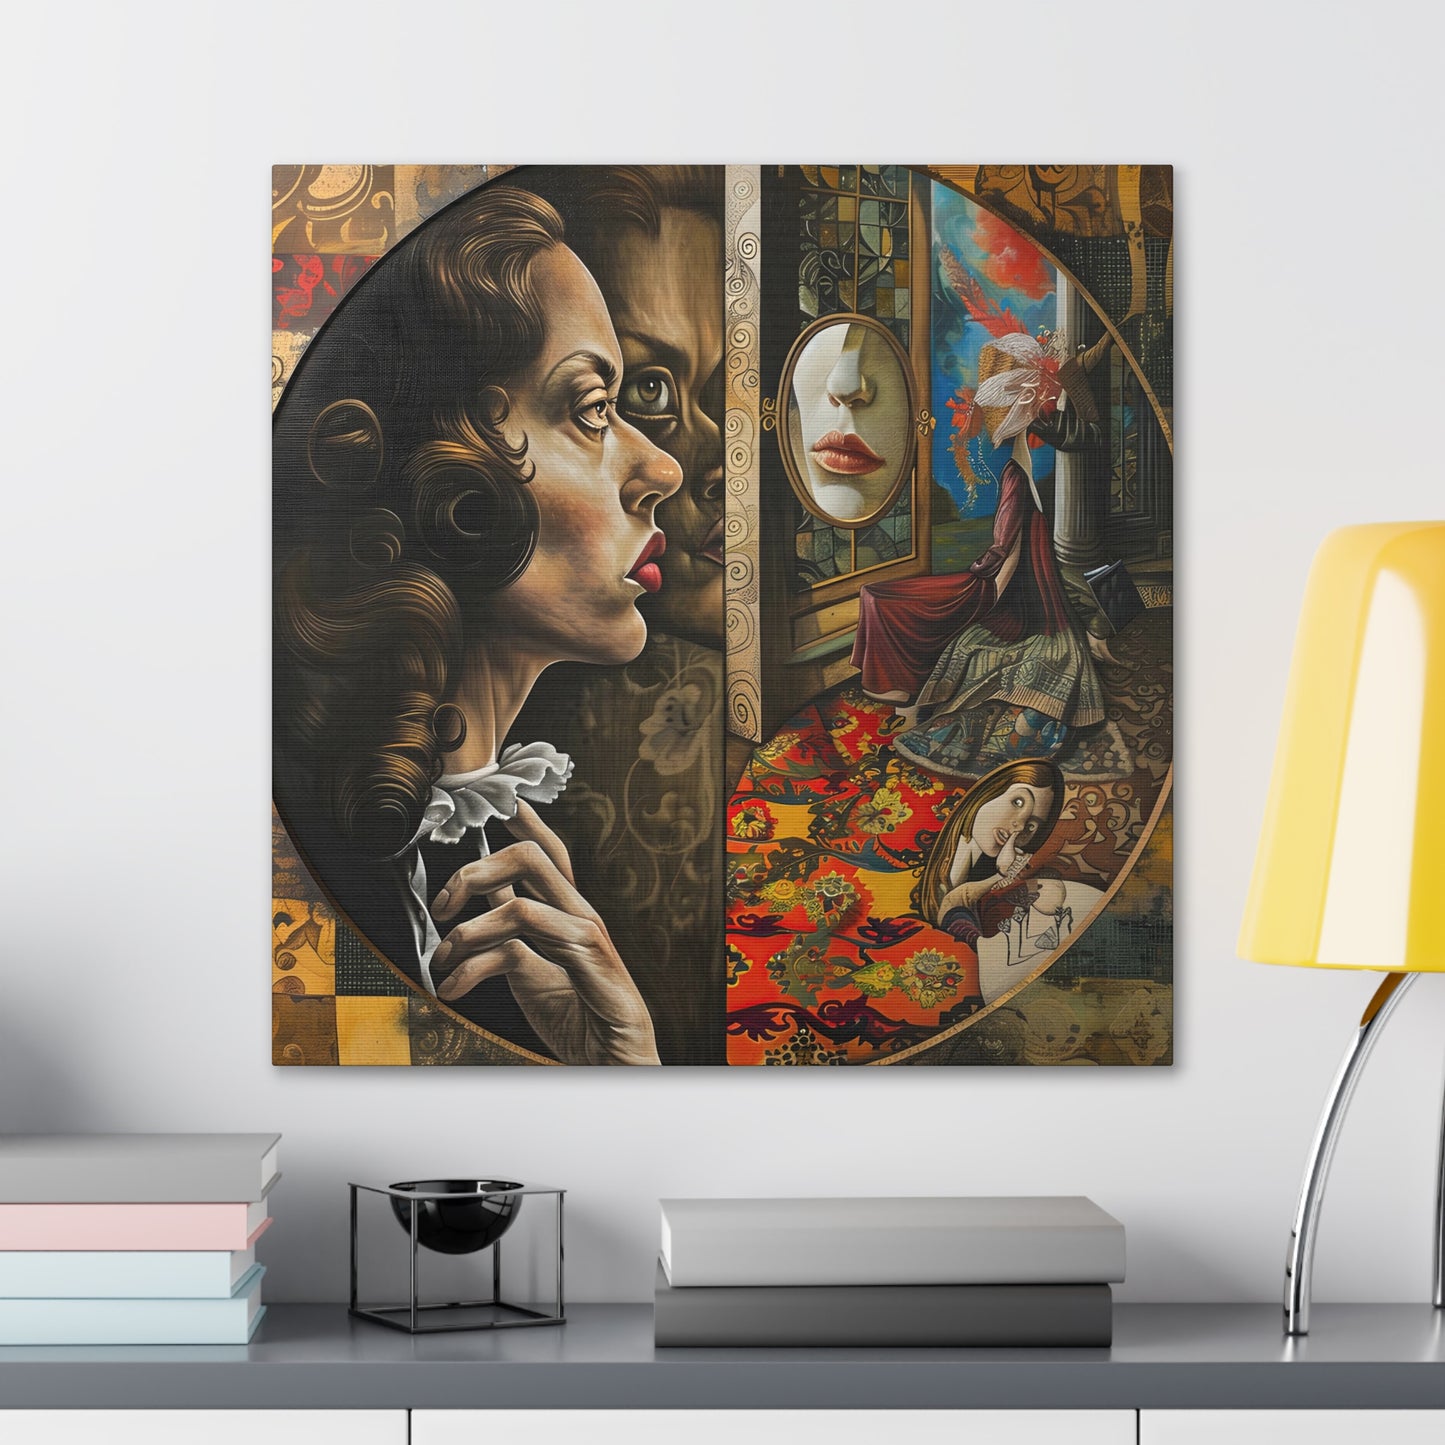 Alaric V. Ermengarde. Reflections of the Mind's Eye. Exclusive Canvas Print